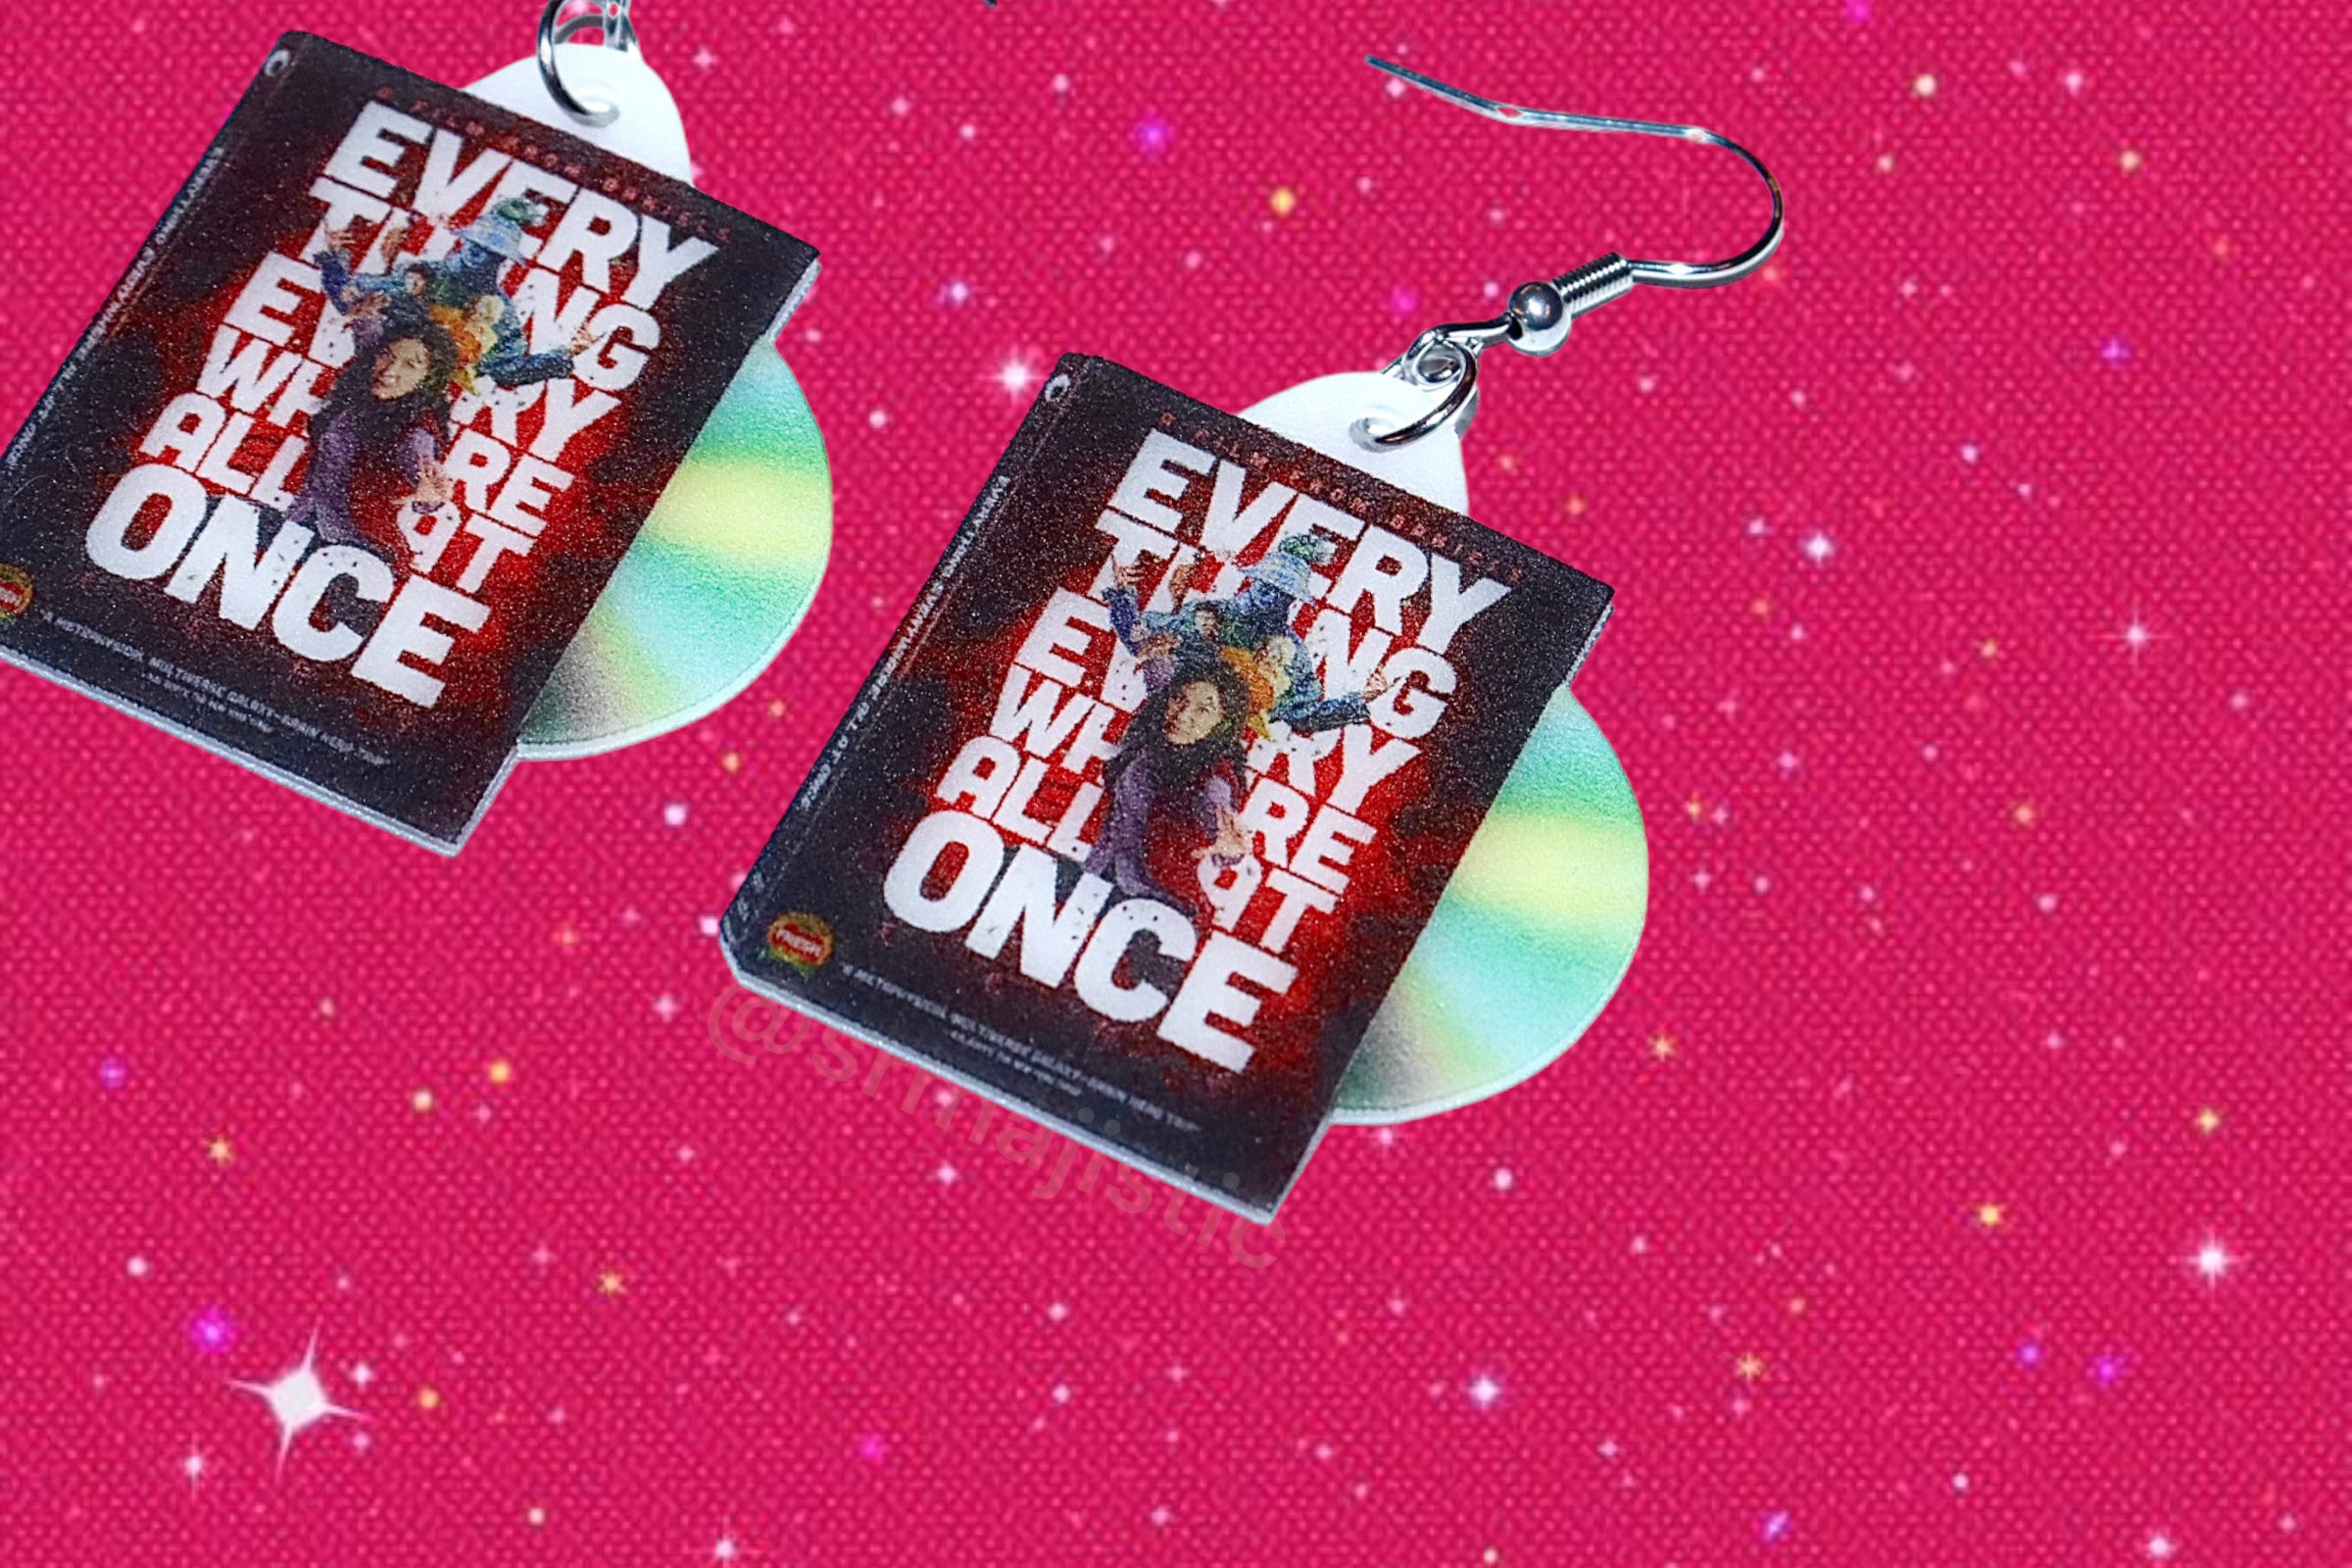 Everything Everywhere All At Once (2022) DVD 2D detailed Handmade Earrings!